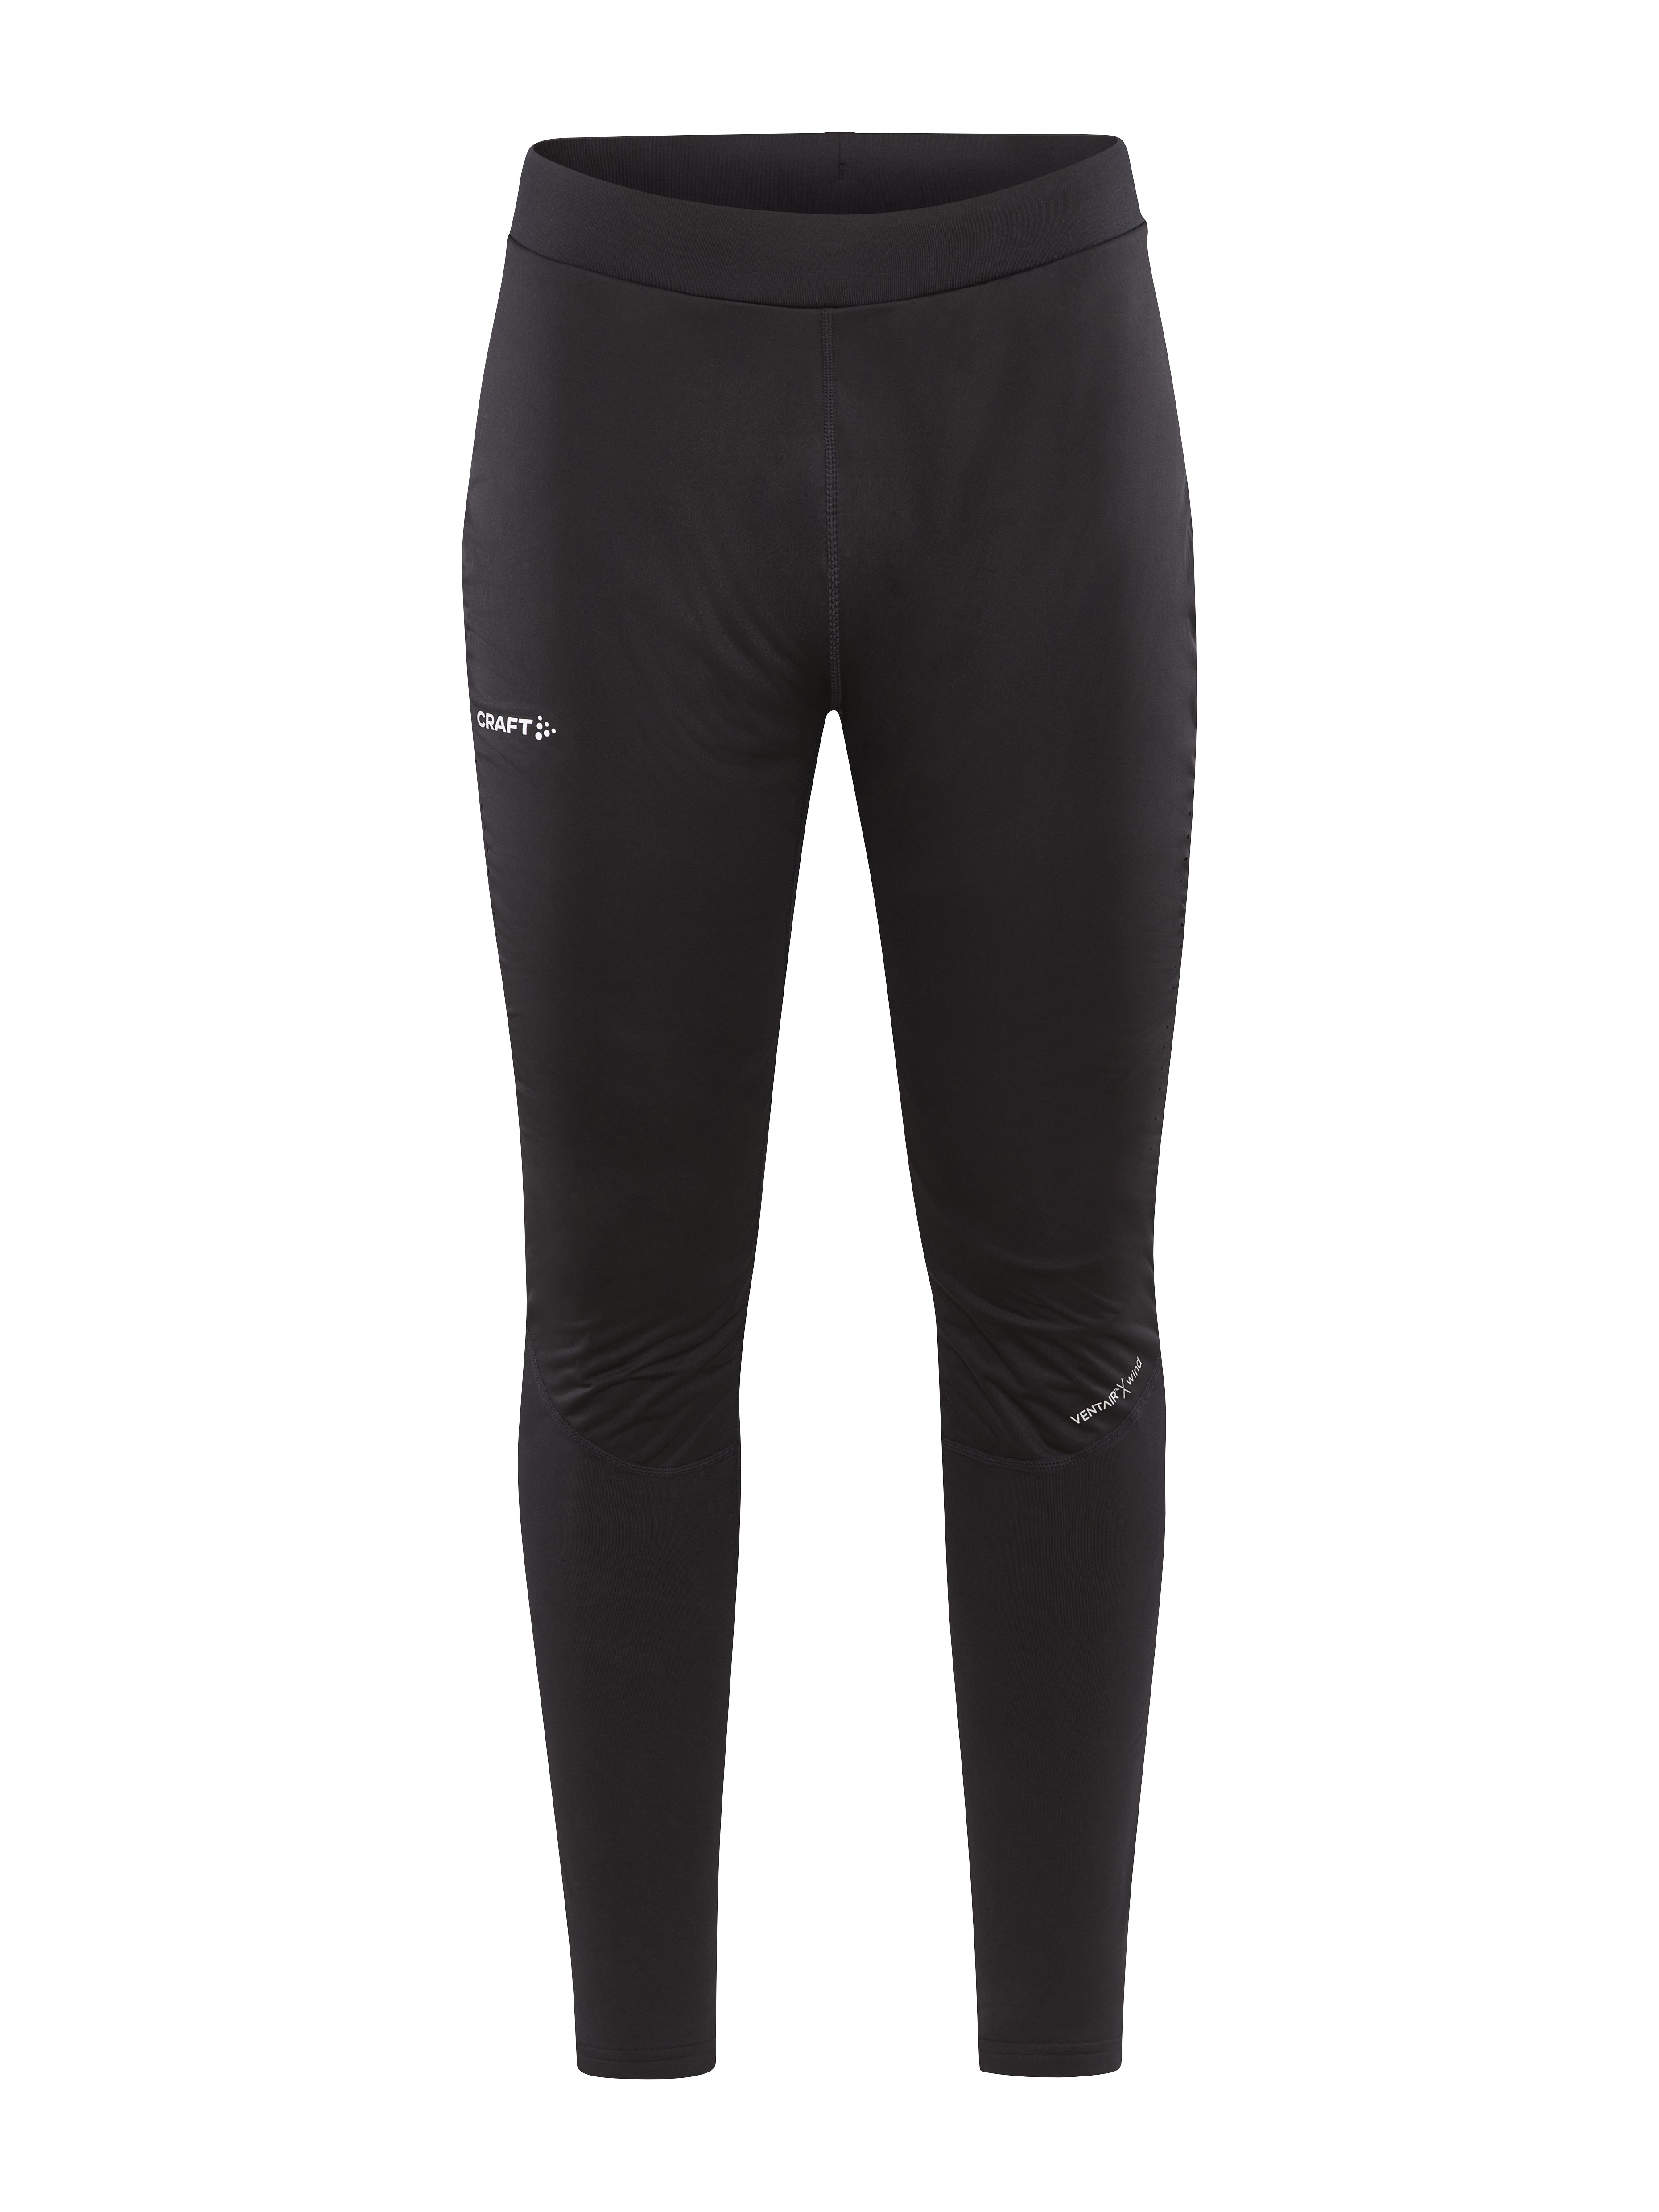  Craft Sportswear Men's ADV Essence Wind Tights, Black, Small :  Clothing, Shoes & Jewelry